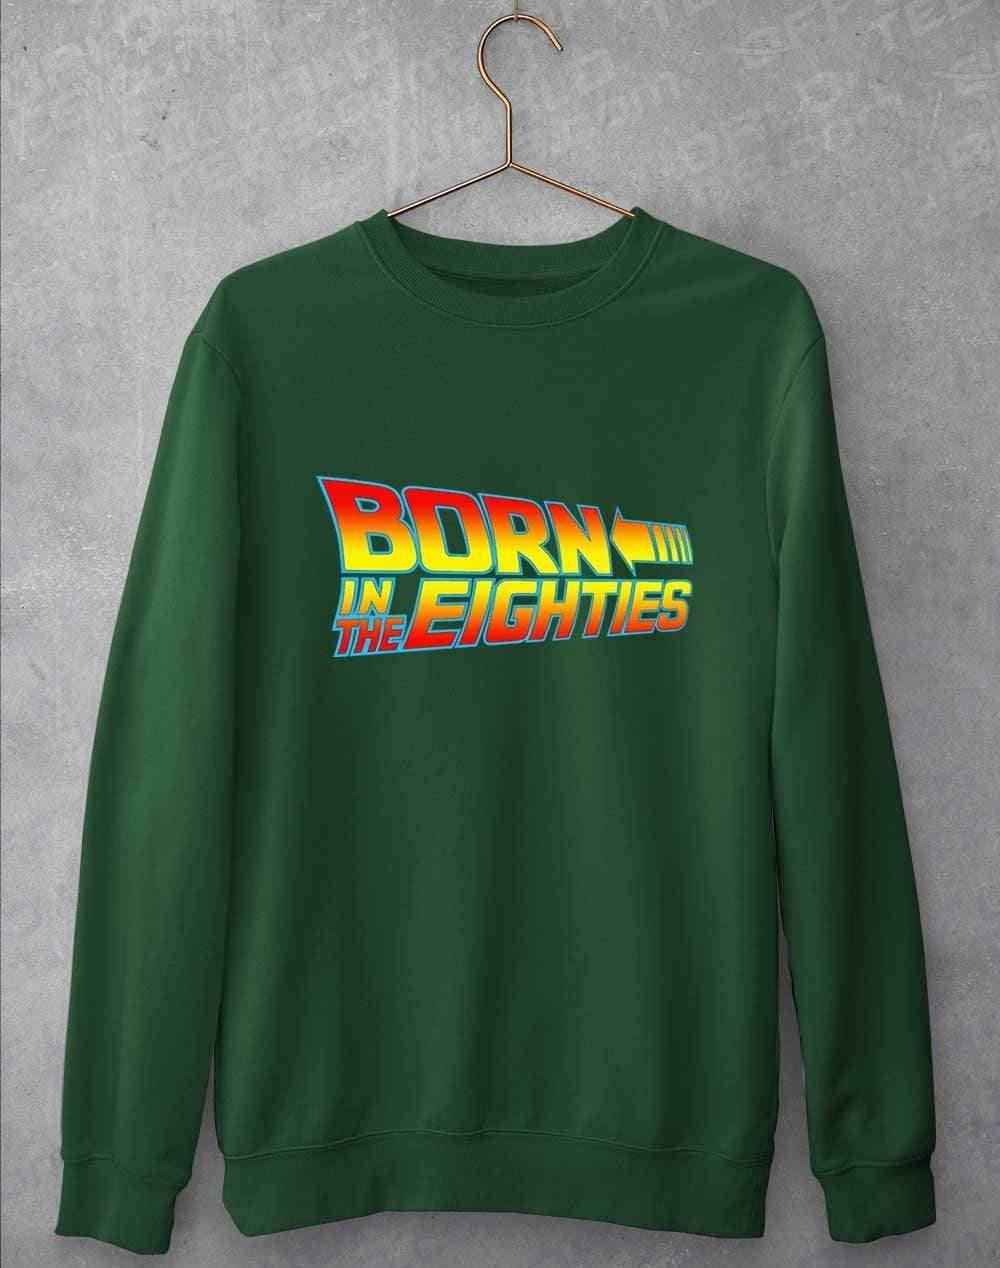 Born in the... (CHOOSE YOUR DECADE!) Sweatshirt 1980s - Bottle Green / S  - Off World Tees